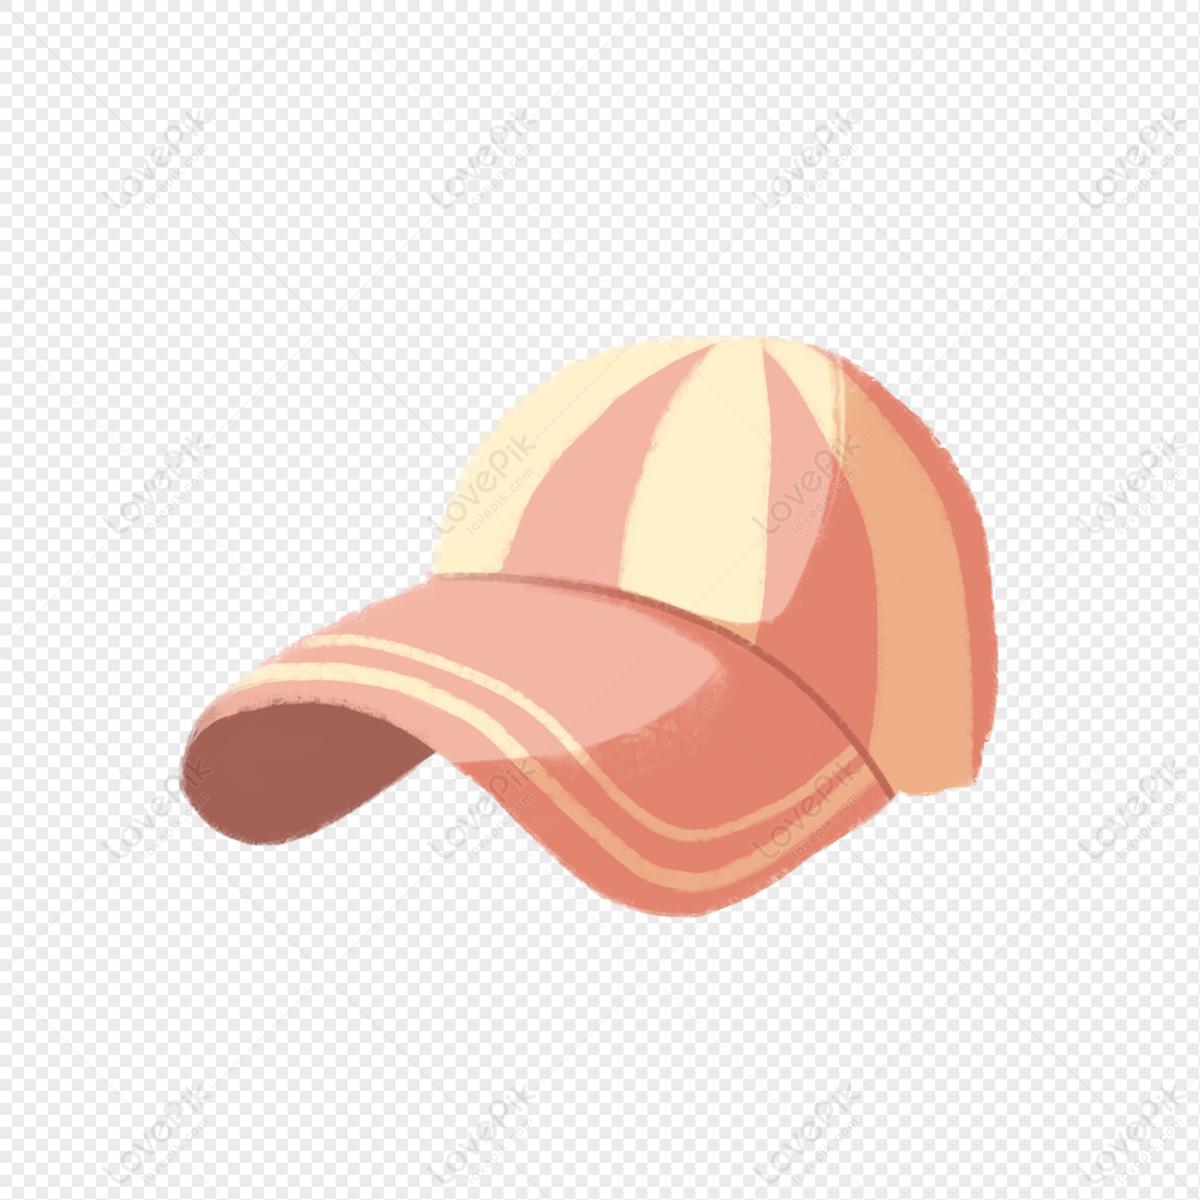 Baseball Cap PNG Hd Transparent Image And Clipart Image For Free Download -  Lovepik